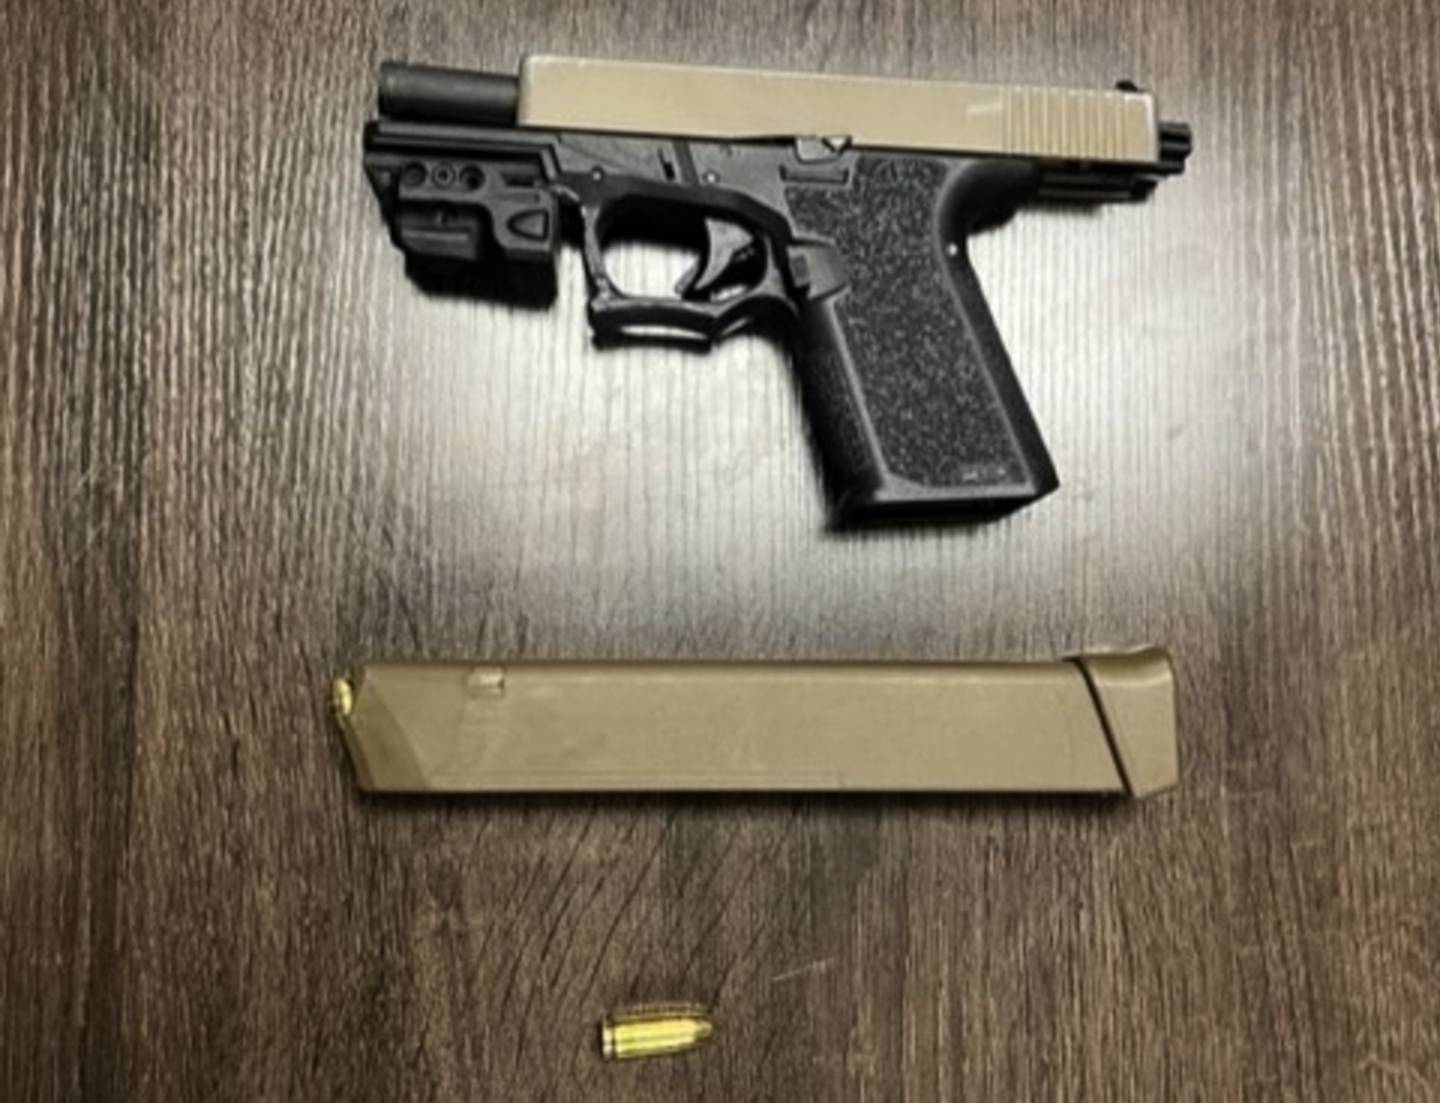 Police recovered this gun, a Polymer80 with an extended magazine, after a car chase involving a teenager and a stolen car in Lochraven last October.